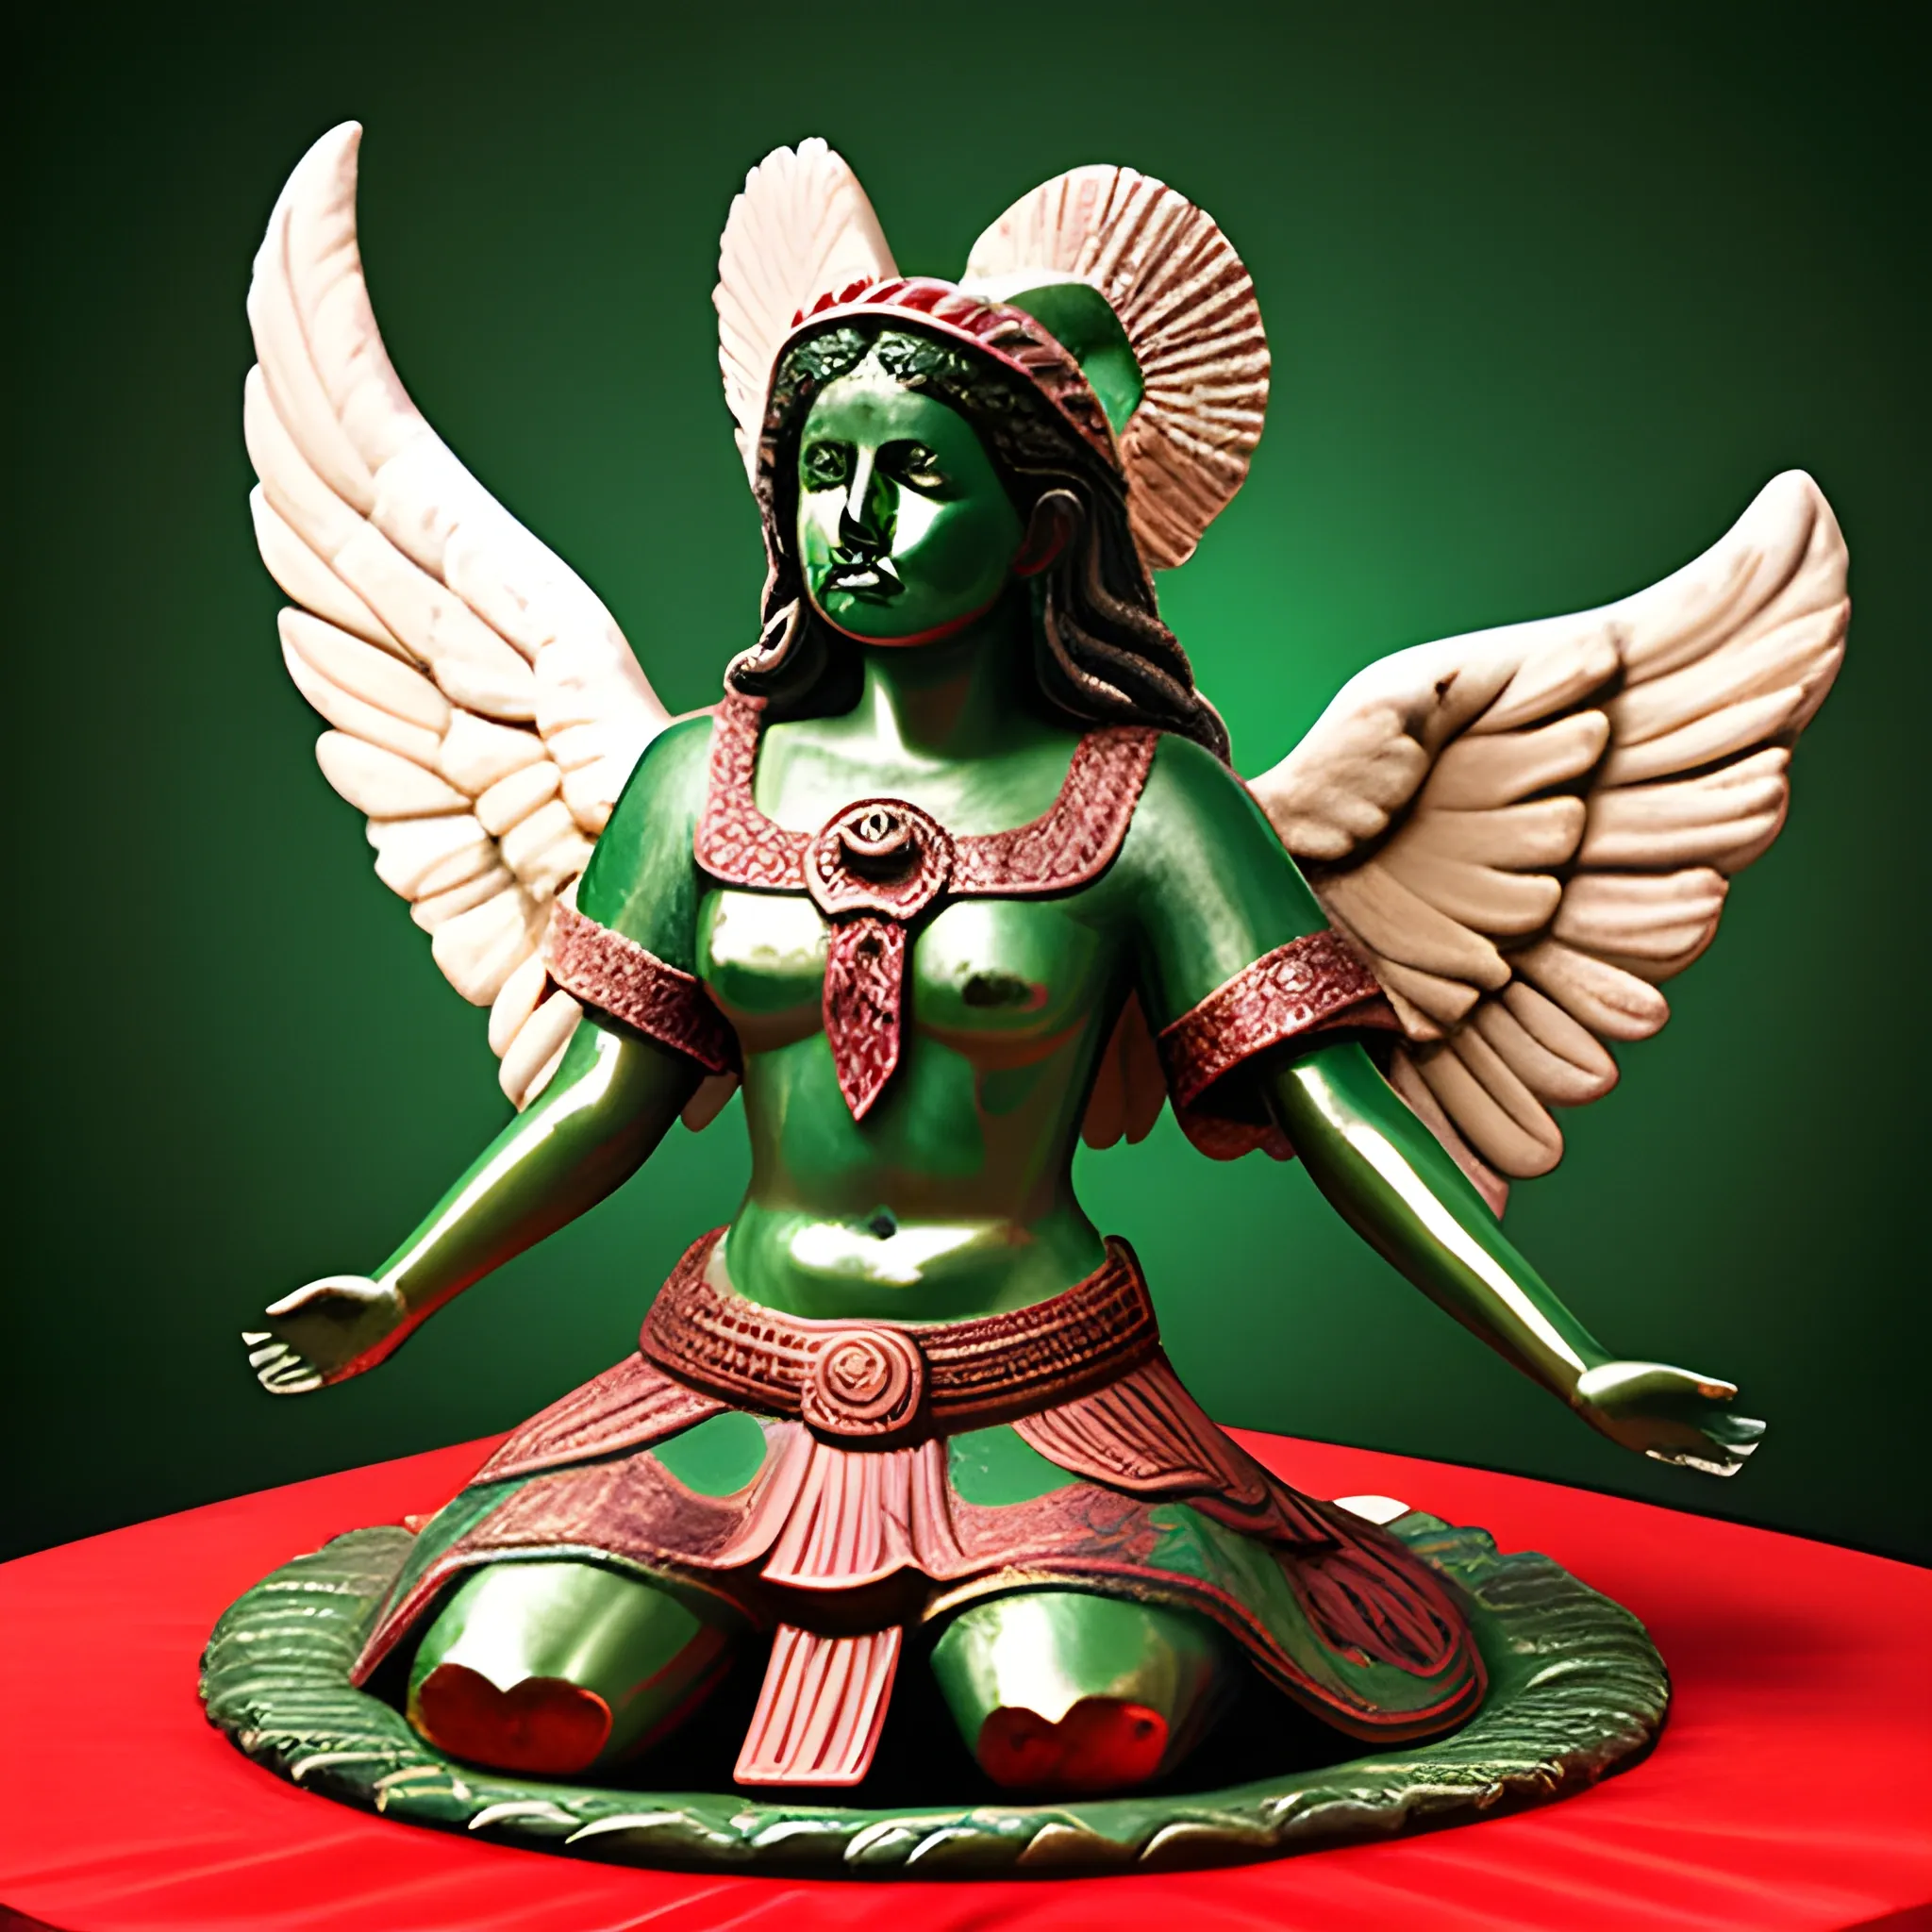 mexico independence angel statue with broken heart, azteca table background